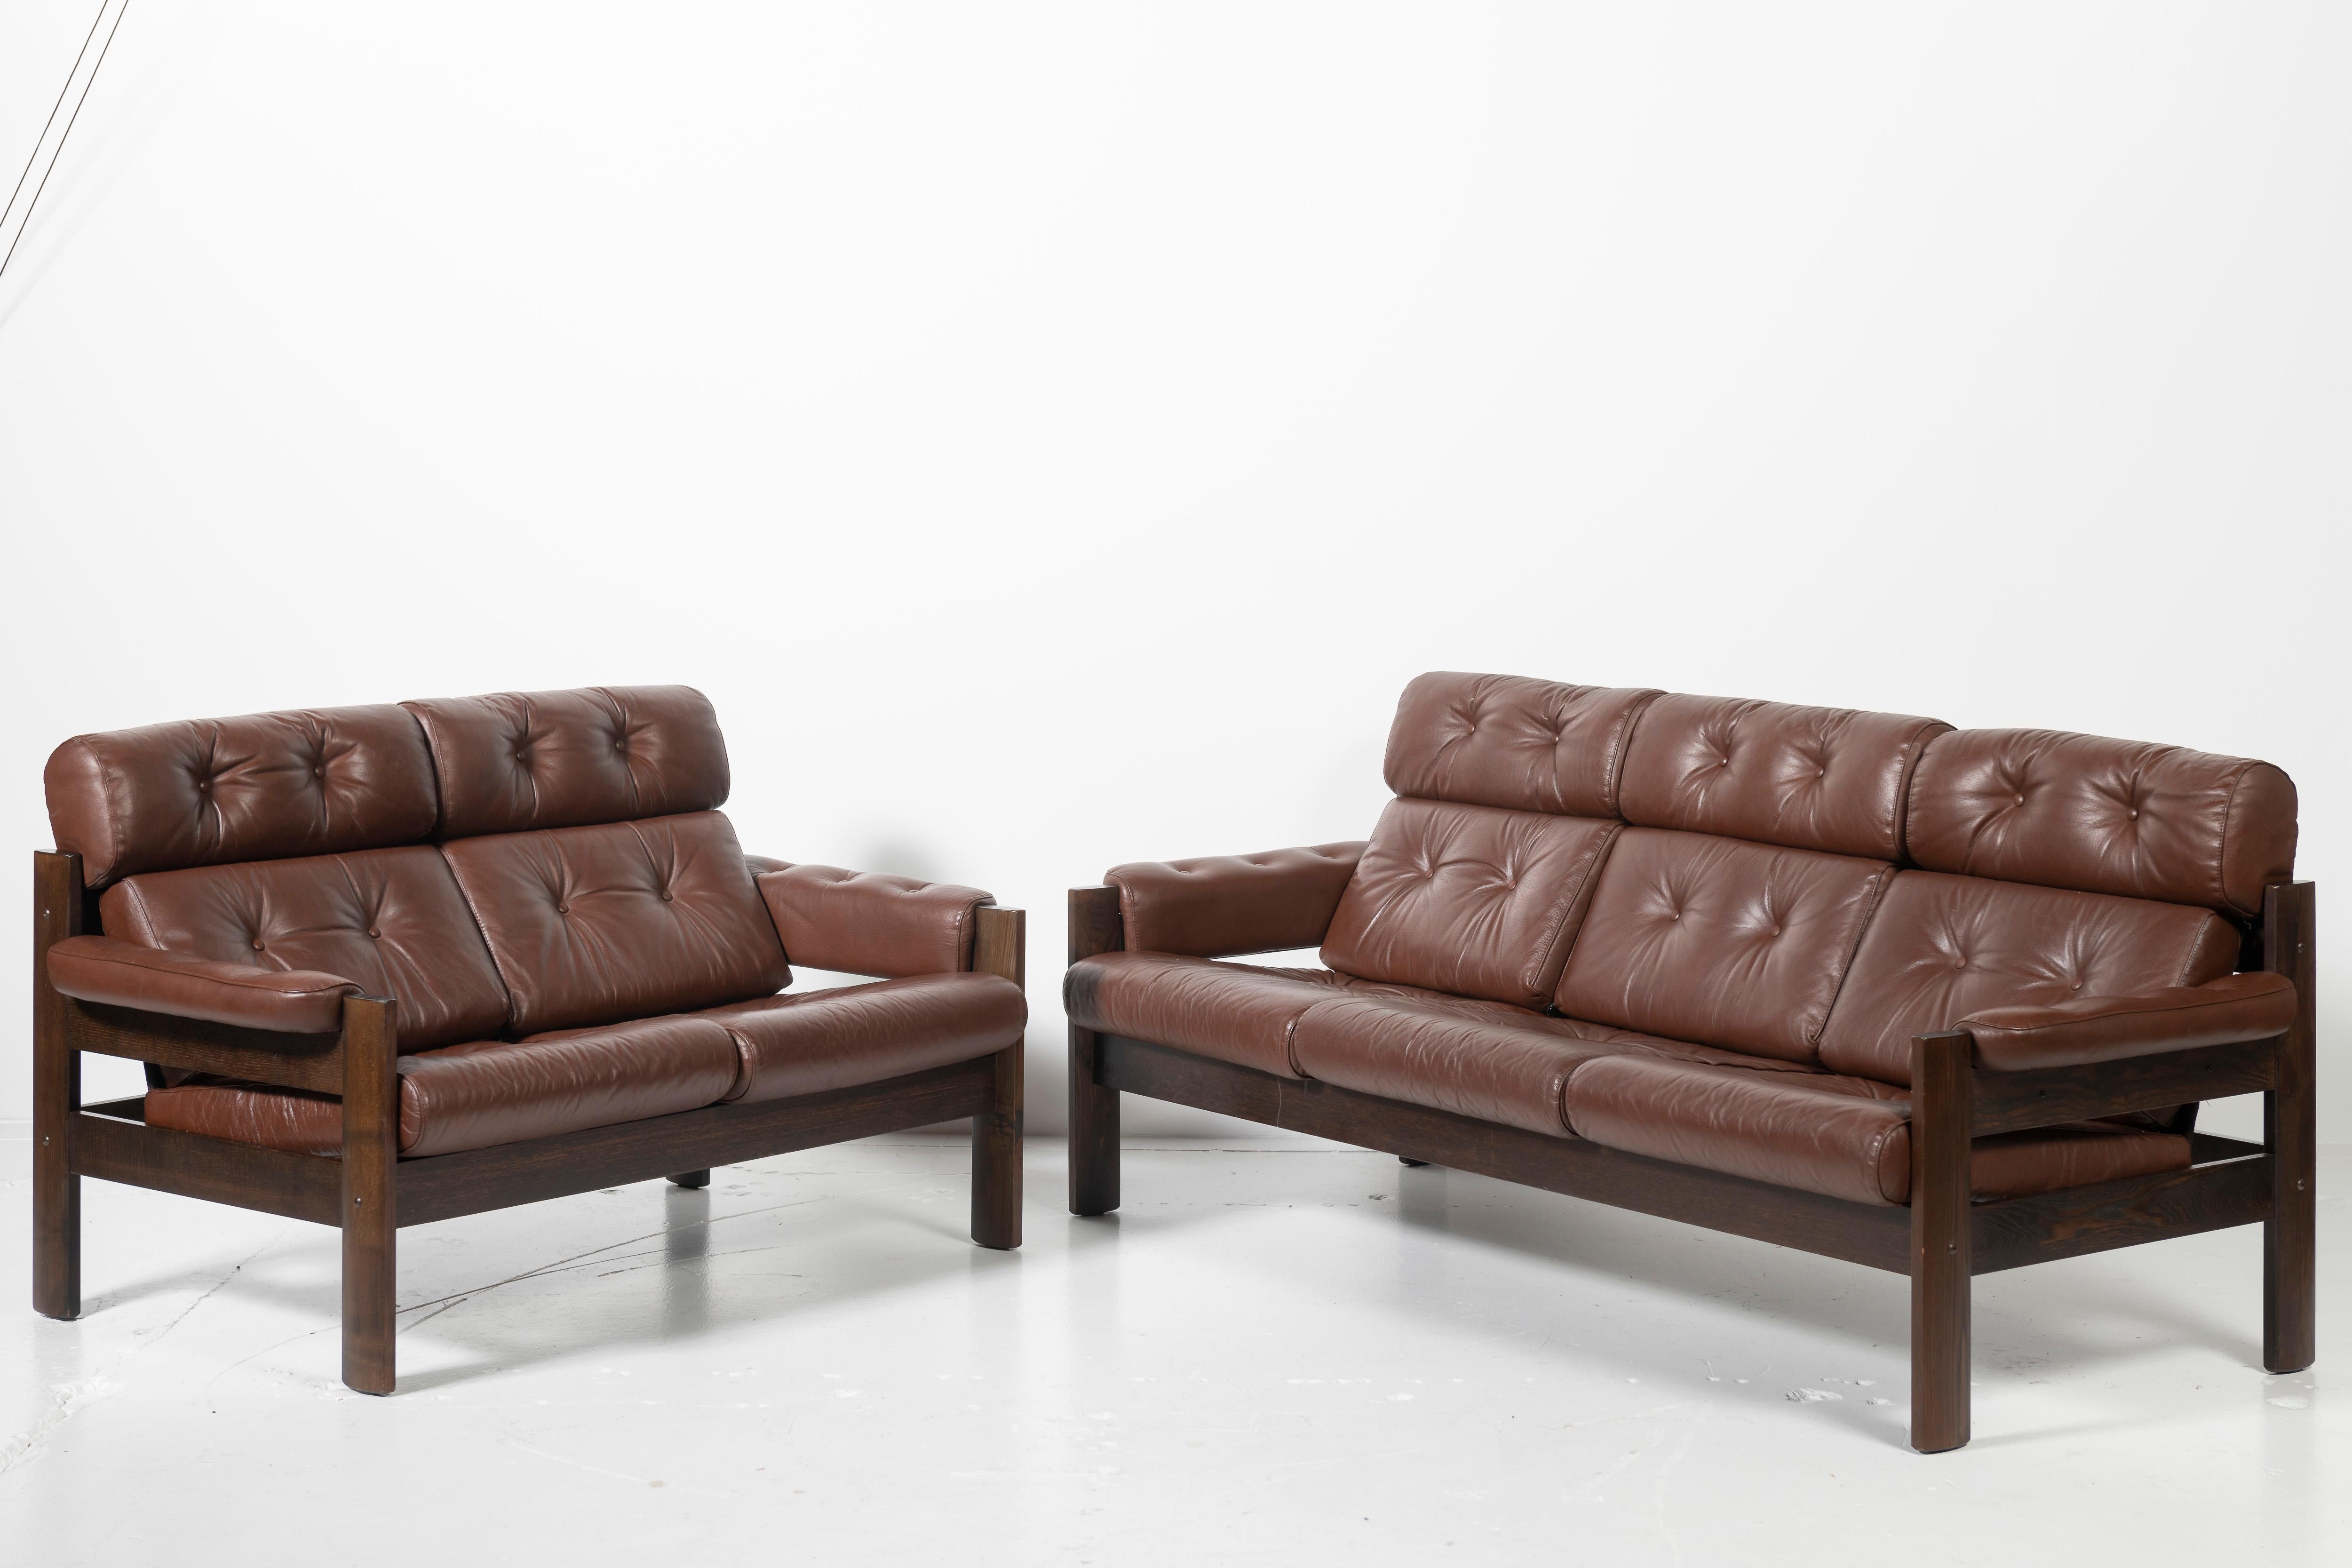 1970's Three Seat Tufted Sofa and Loveseat Set in Leather and Rosewood, Norway For Sale 5